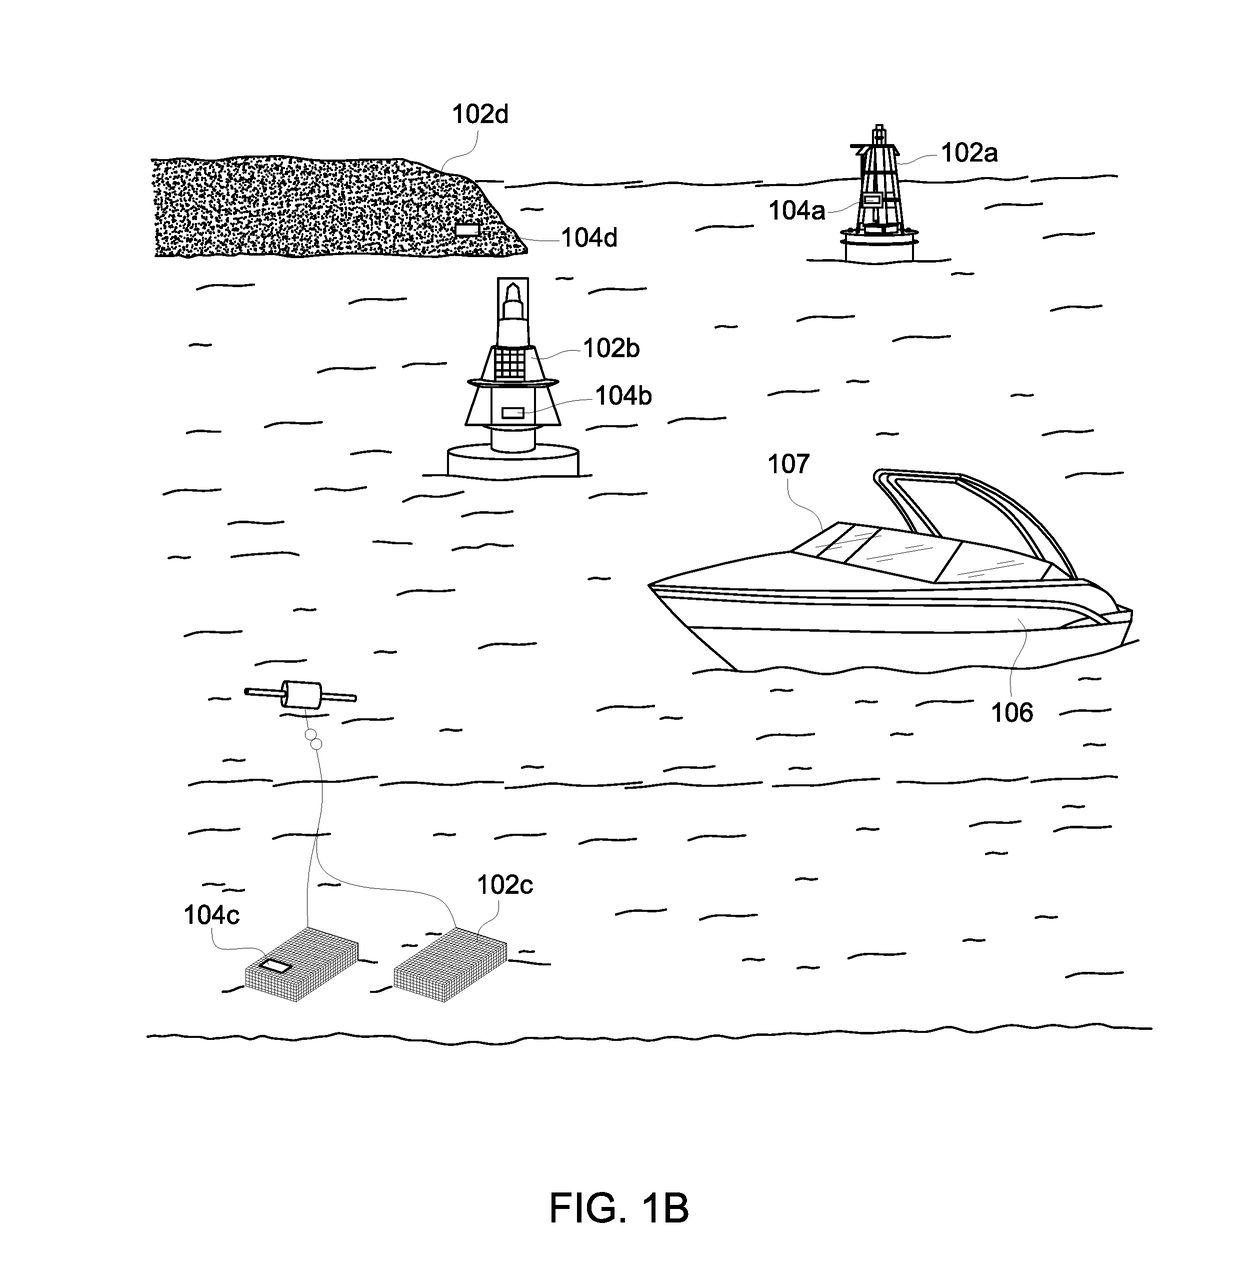 Signaling apparatus and system to identify and locate marine objects and hazards